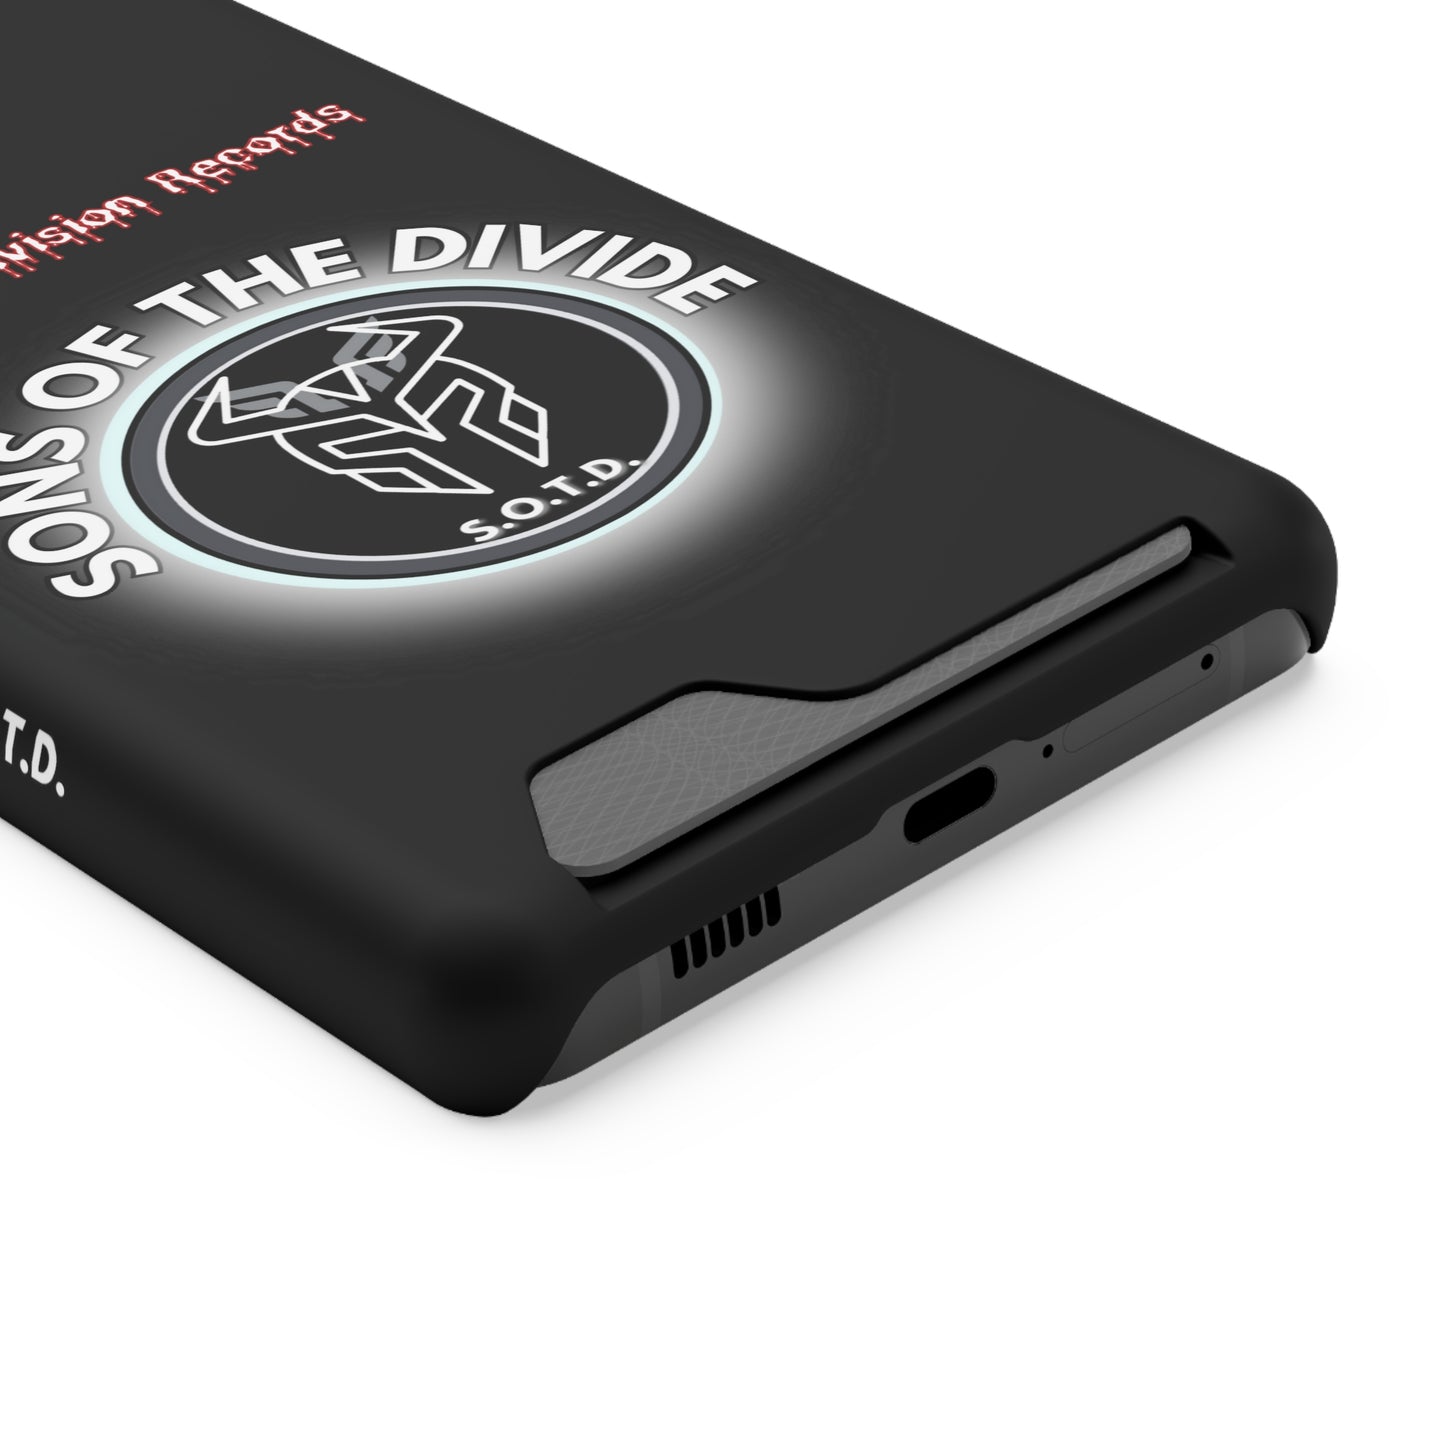 Sons of the Divide Phone Case With Card Holder